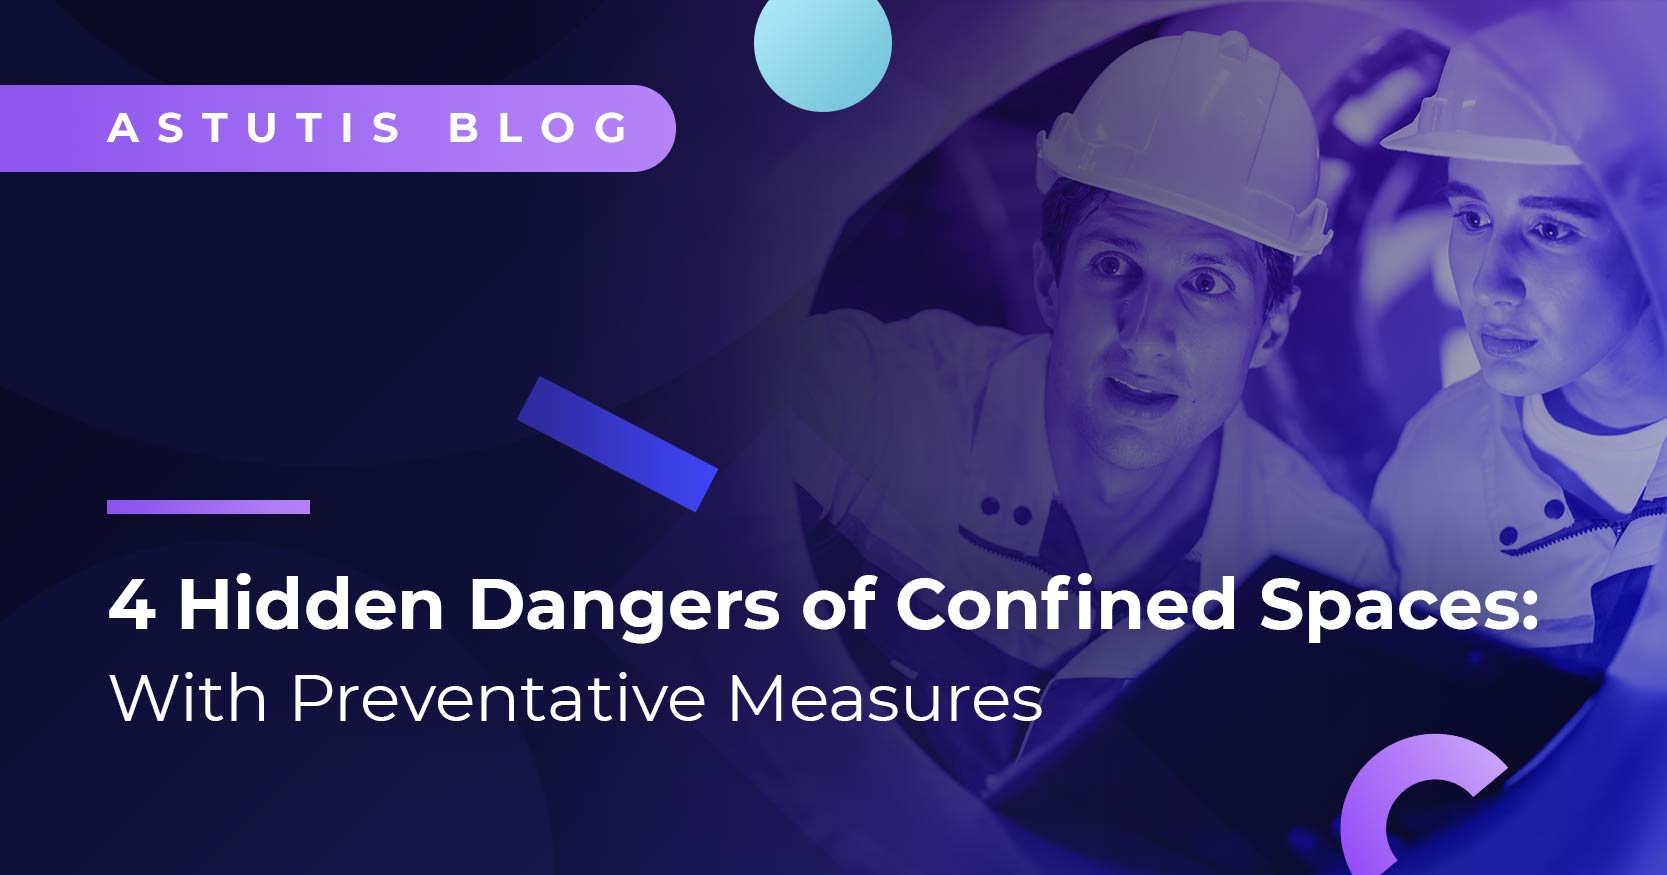  4 Hidden Dangers of Confined Spaces: With Preventative Measures Image